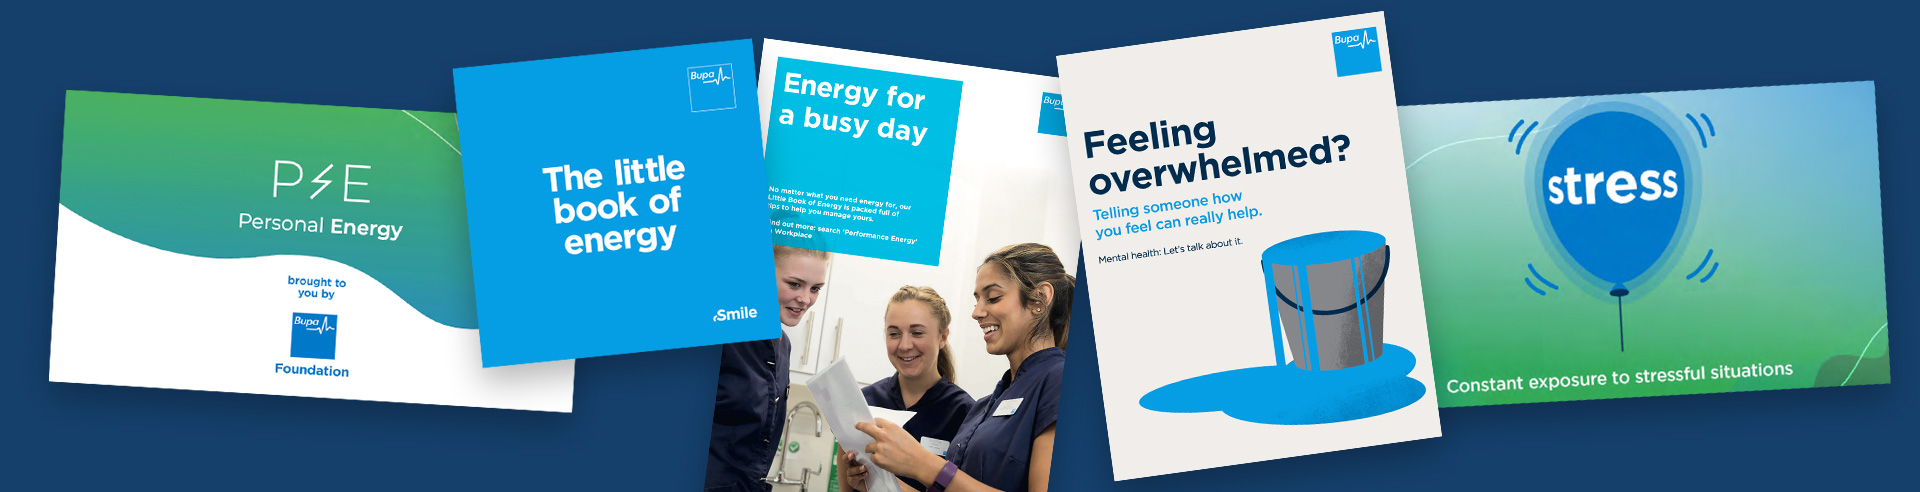 employee leaflets and health and wellbeing campaigns for Bupa colleagues an employee engagement case study by Sequel Group